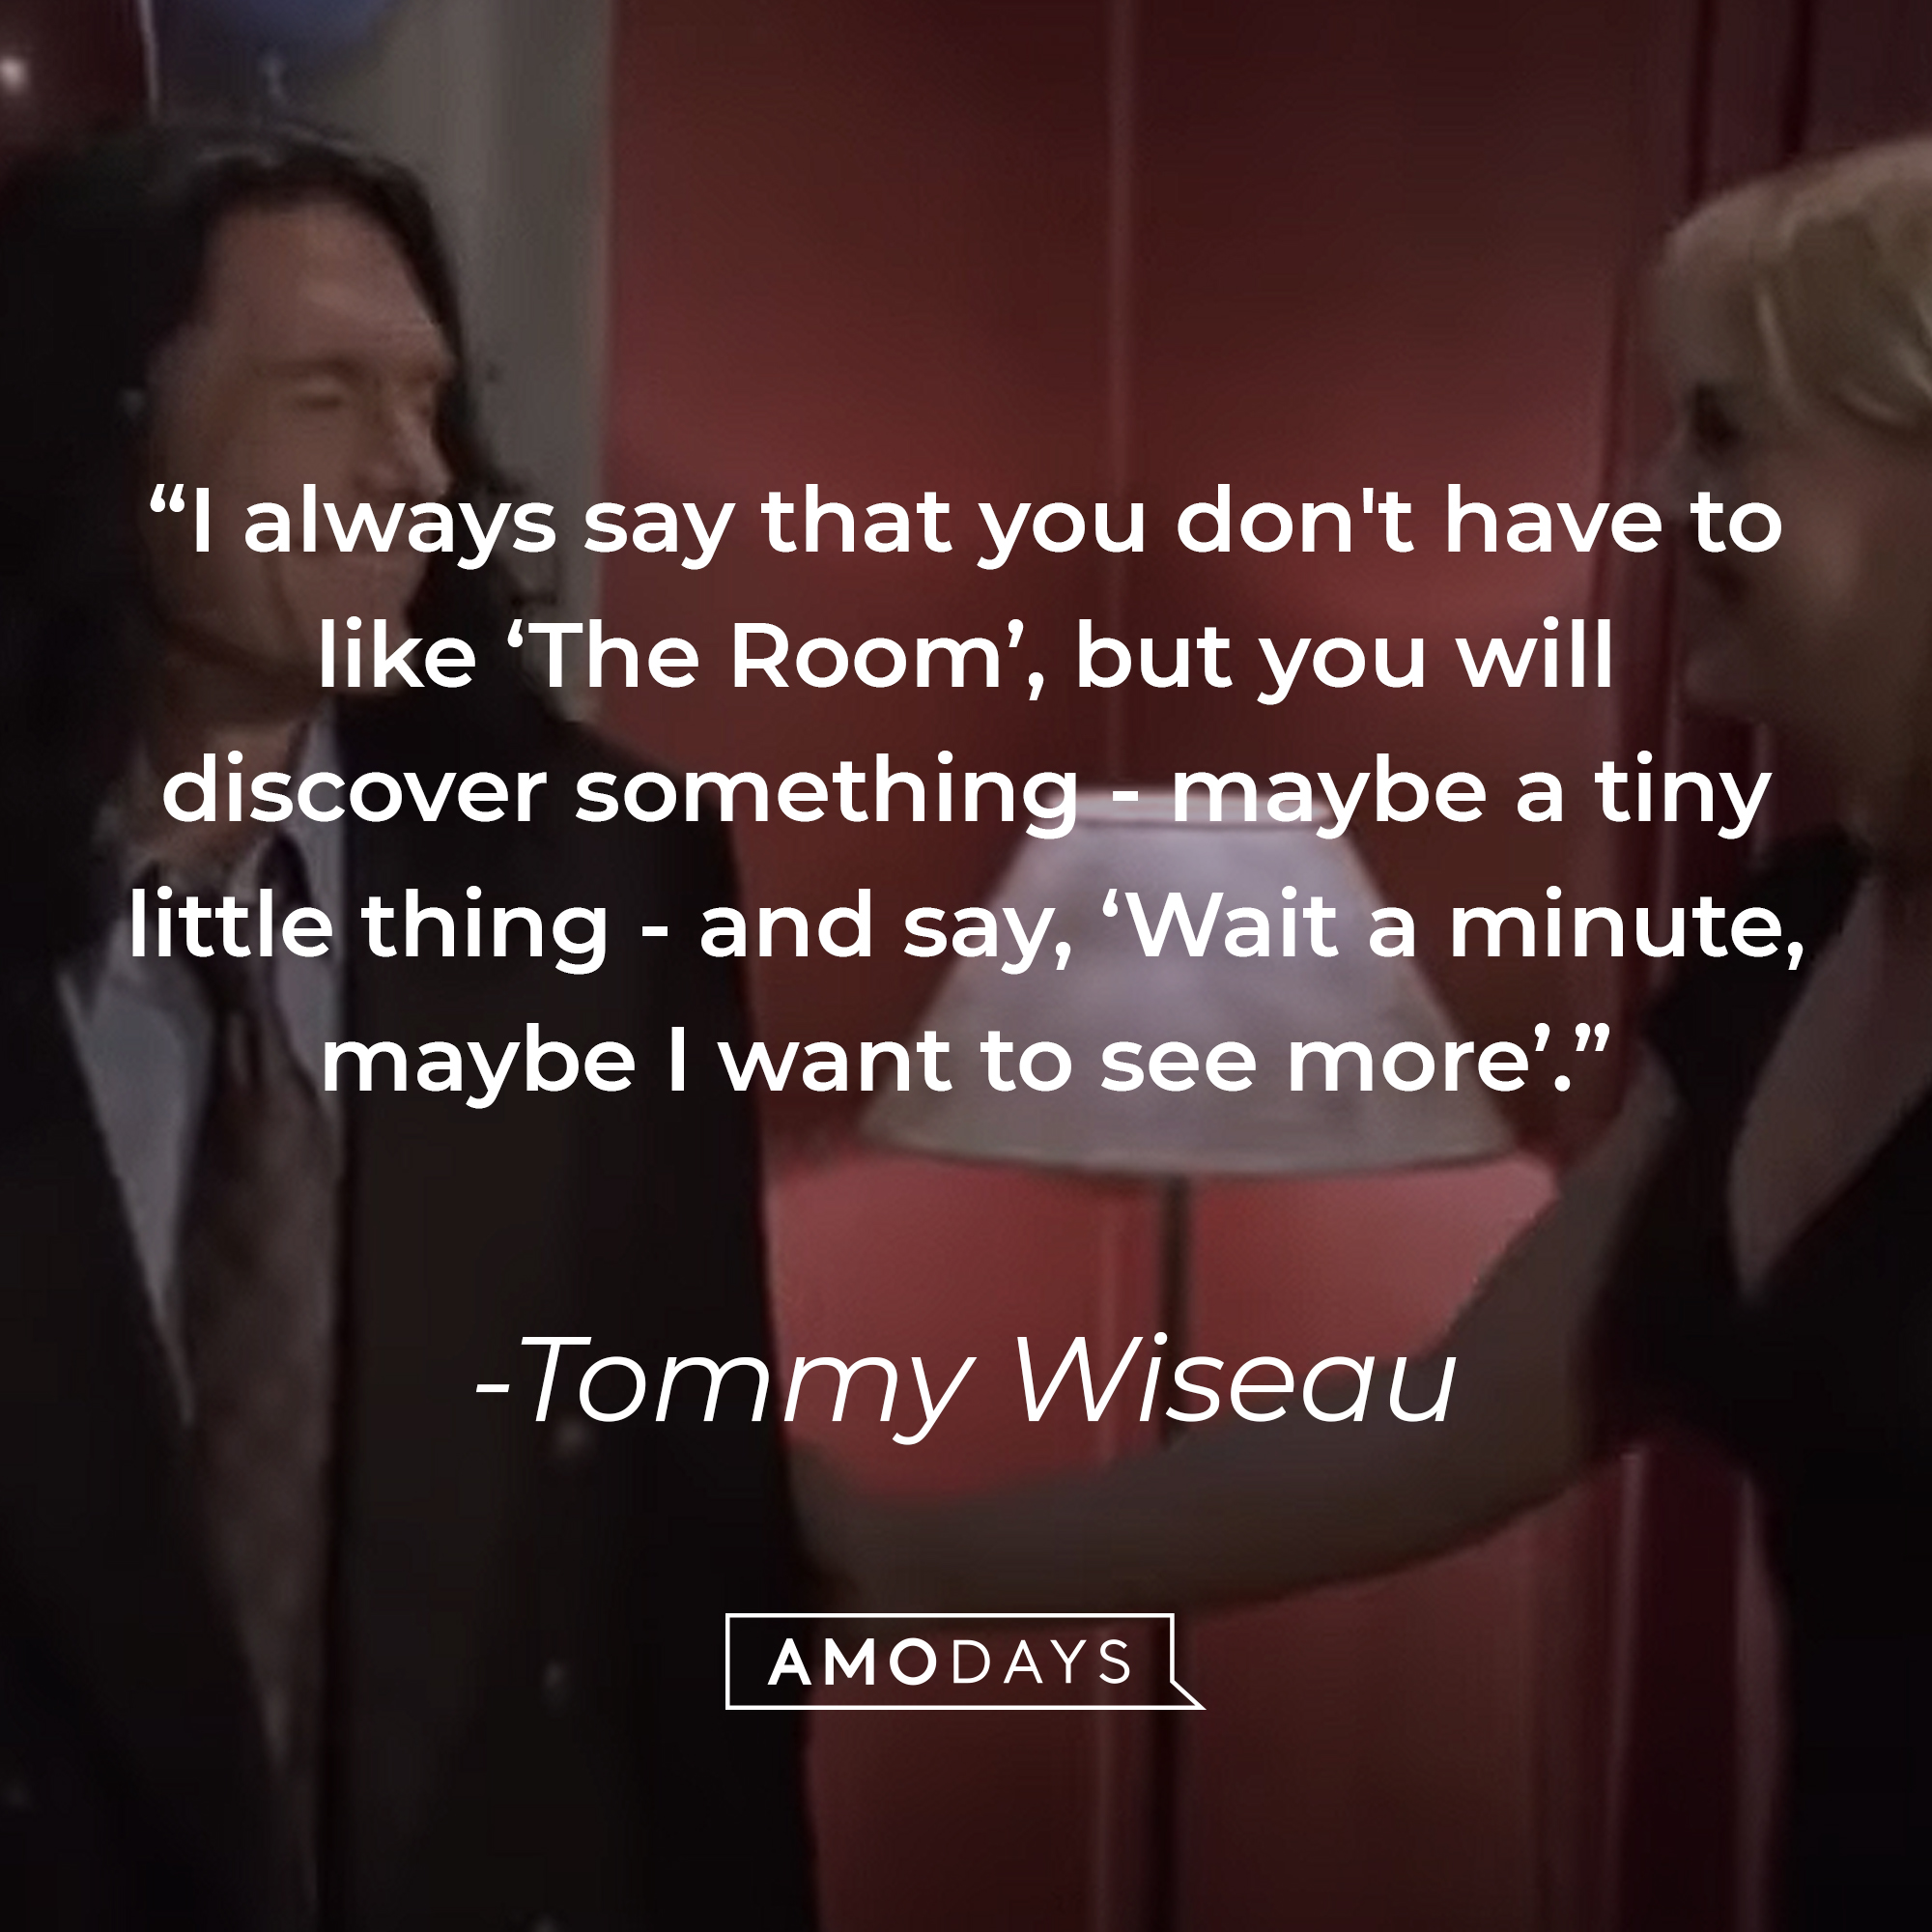 A photo from "The Room" with the quote, "I always say that you don't have to like 'The Room', but you will discover something - maybe a tiny little thing - and say, 'Wait a minute, maybe I want to see more.'" 